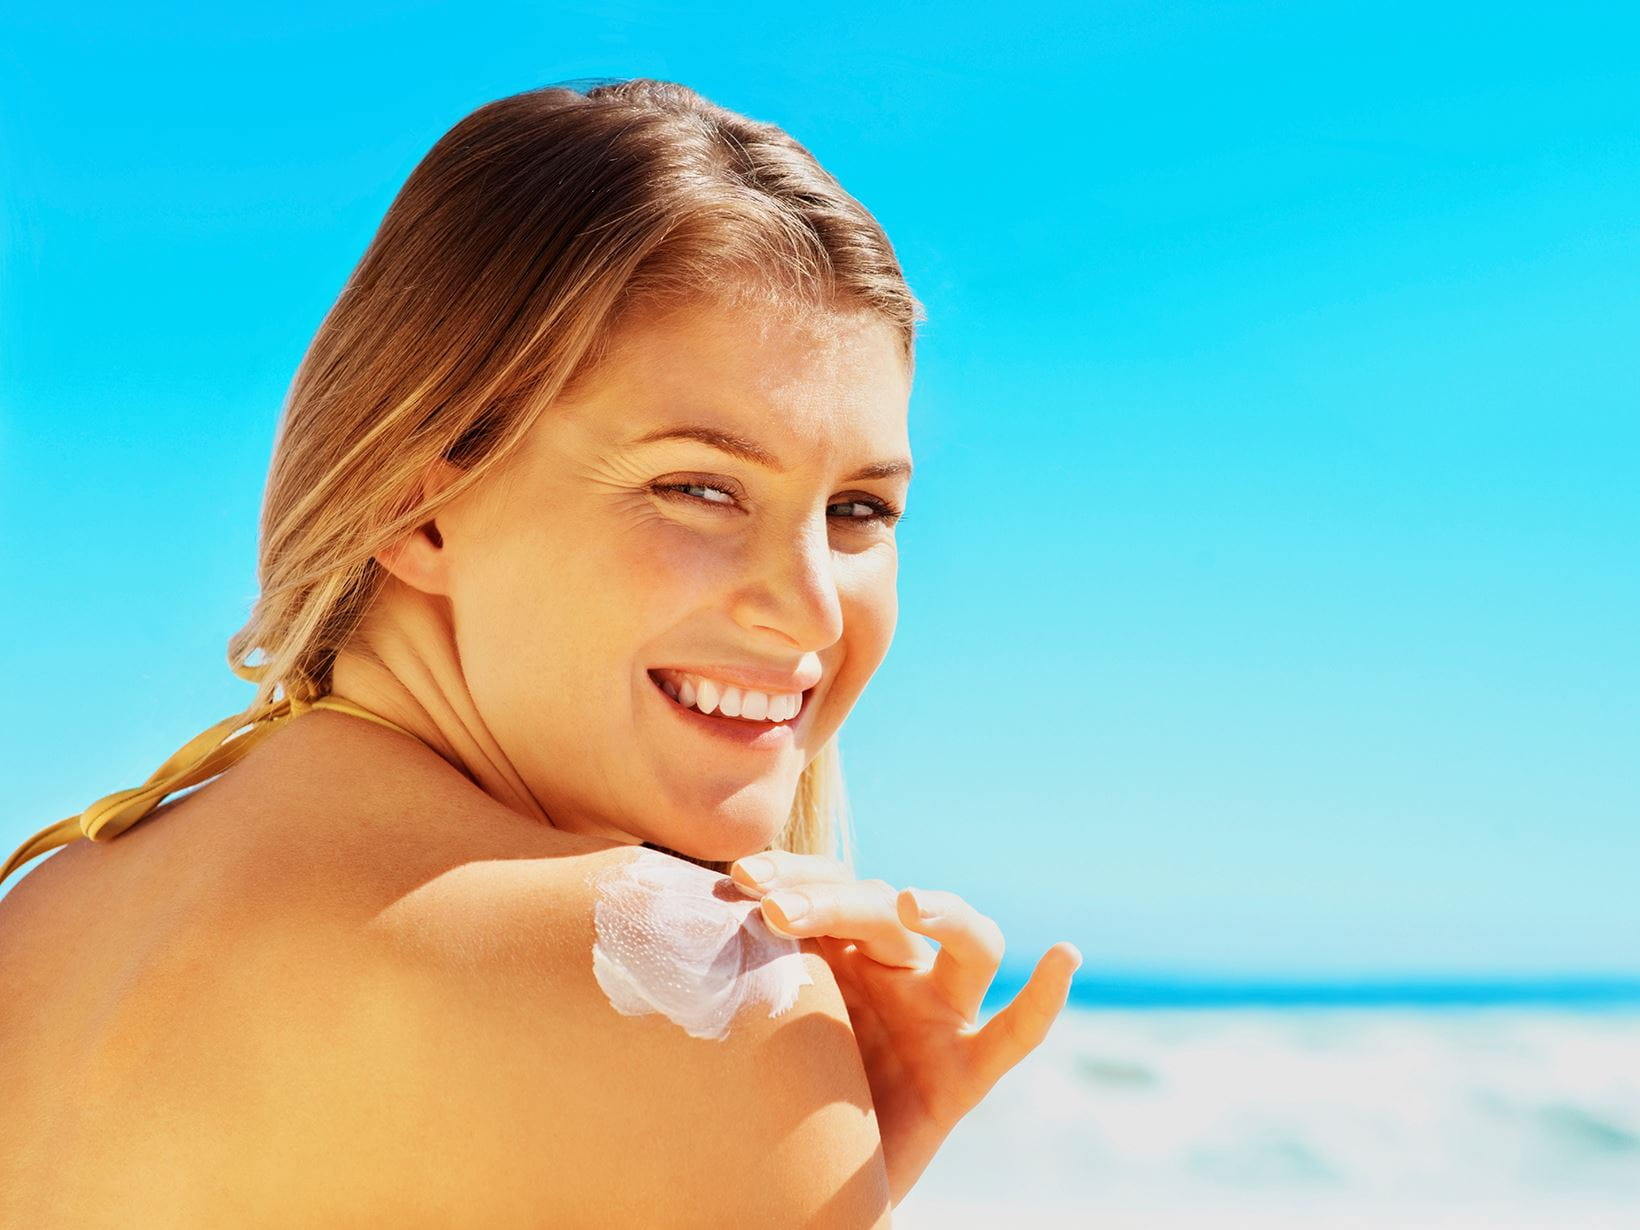 woman smiling with suncream on